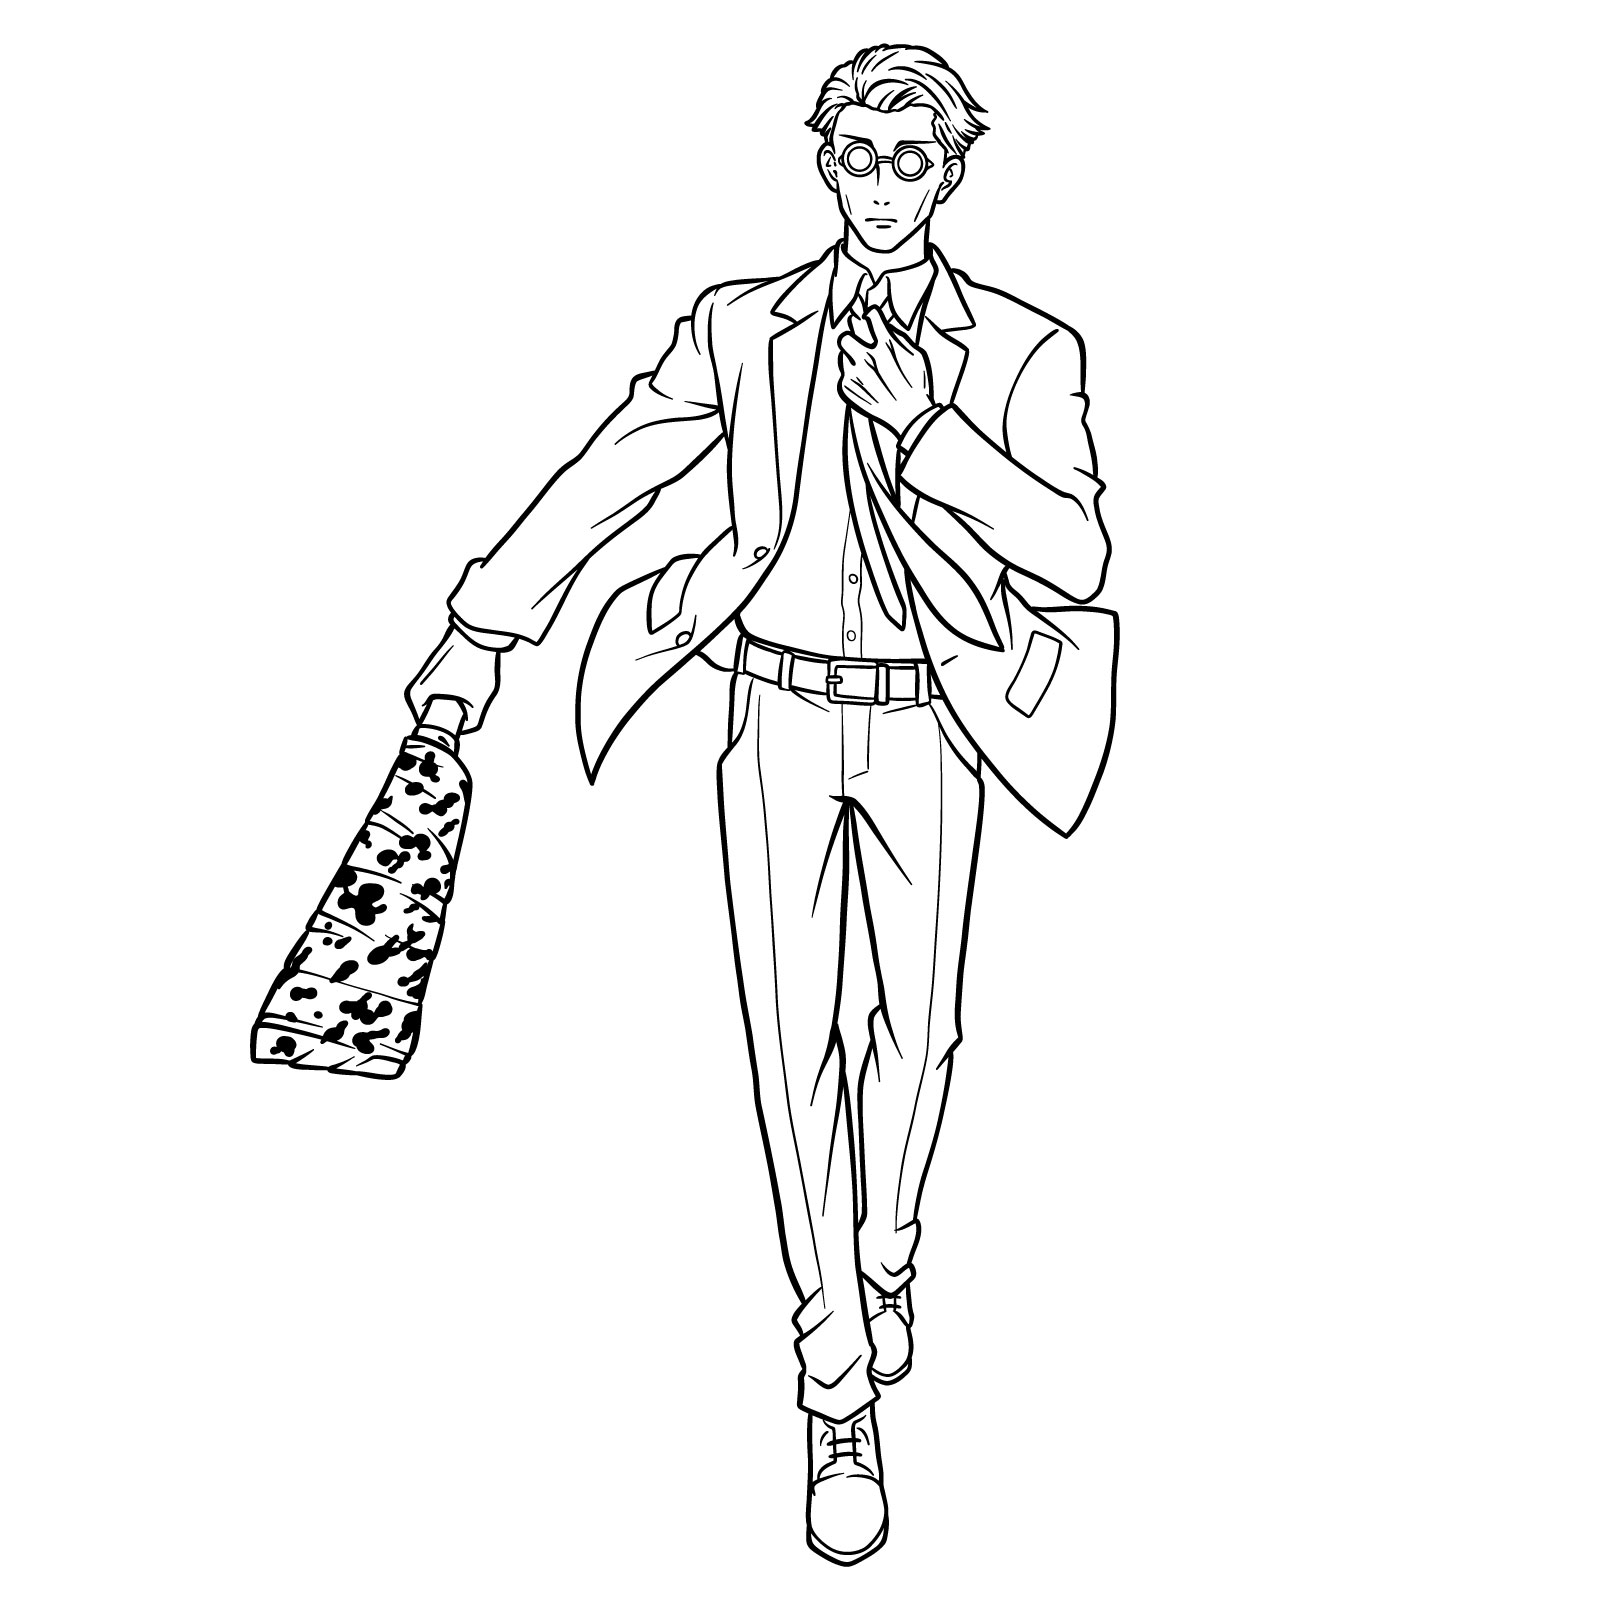 Easy step-by-step drawing of Kento Nanami full body - final step